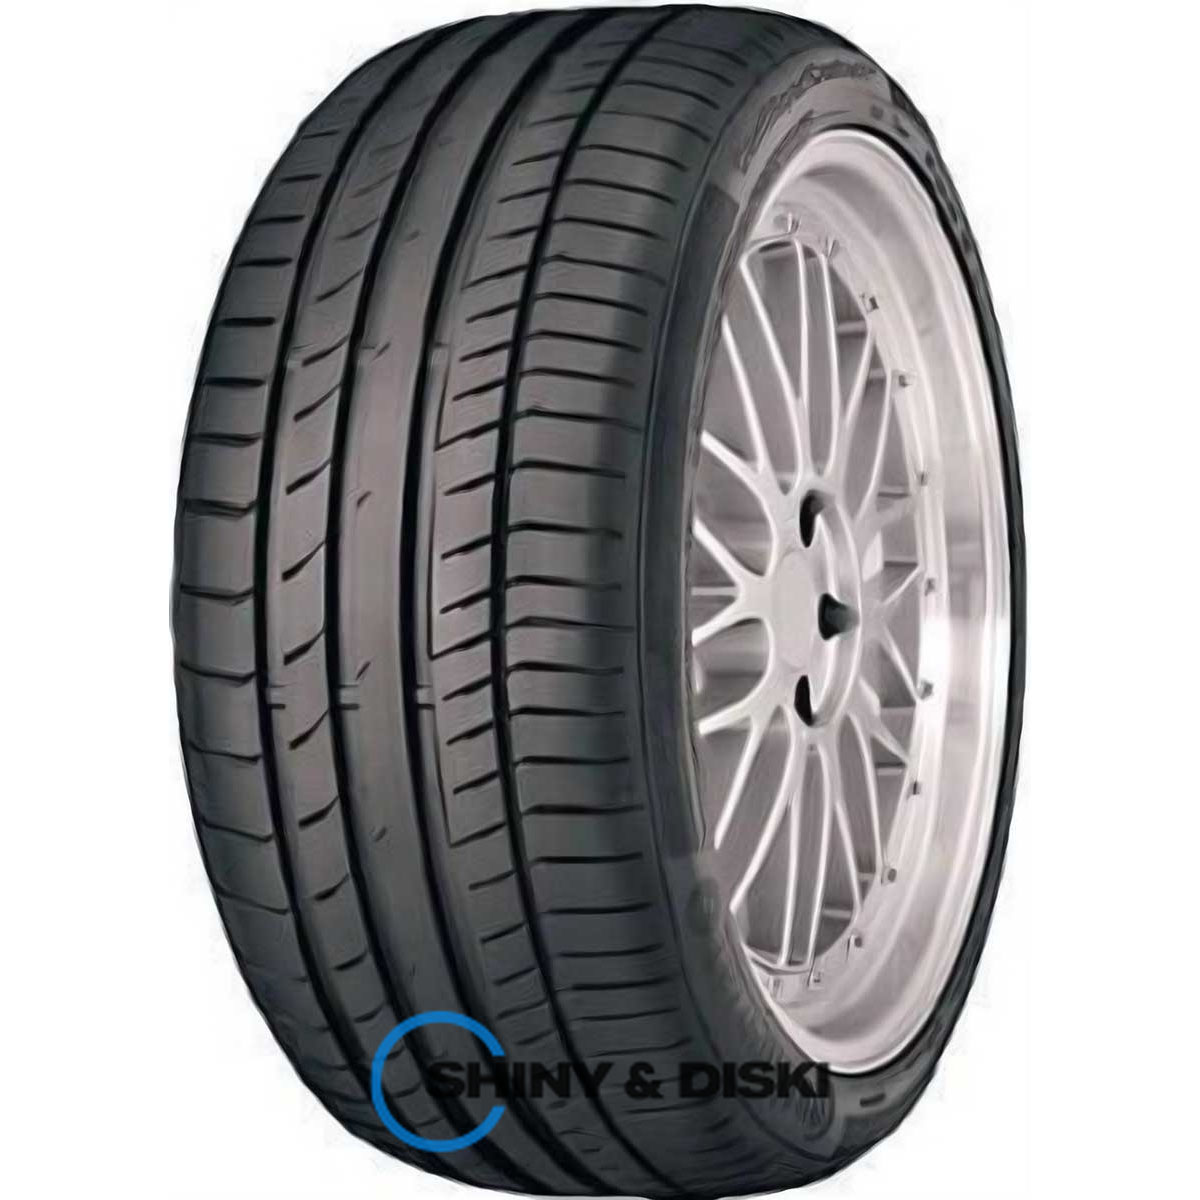 continental sportcontact 5p 285/30 r19 98y mo